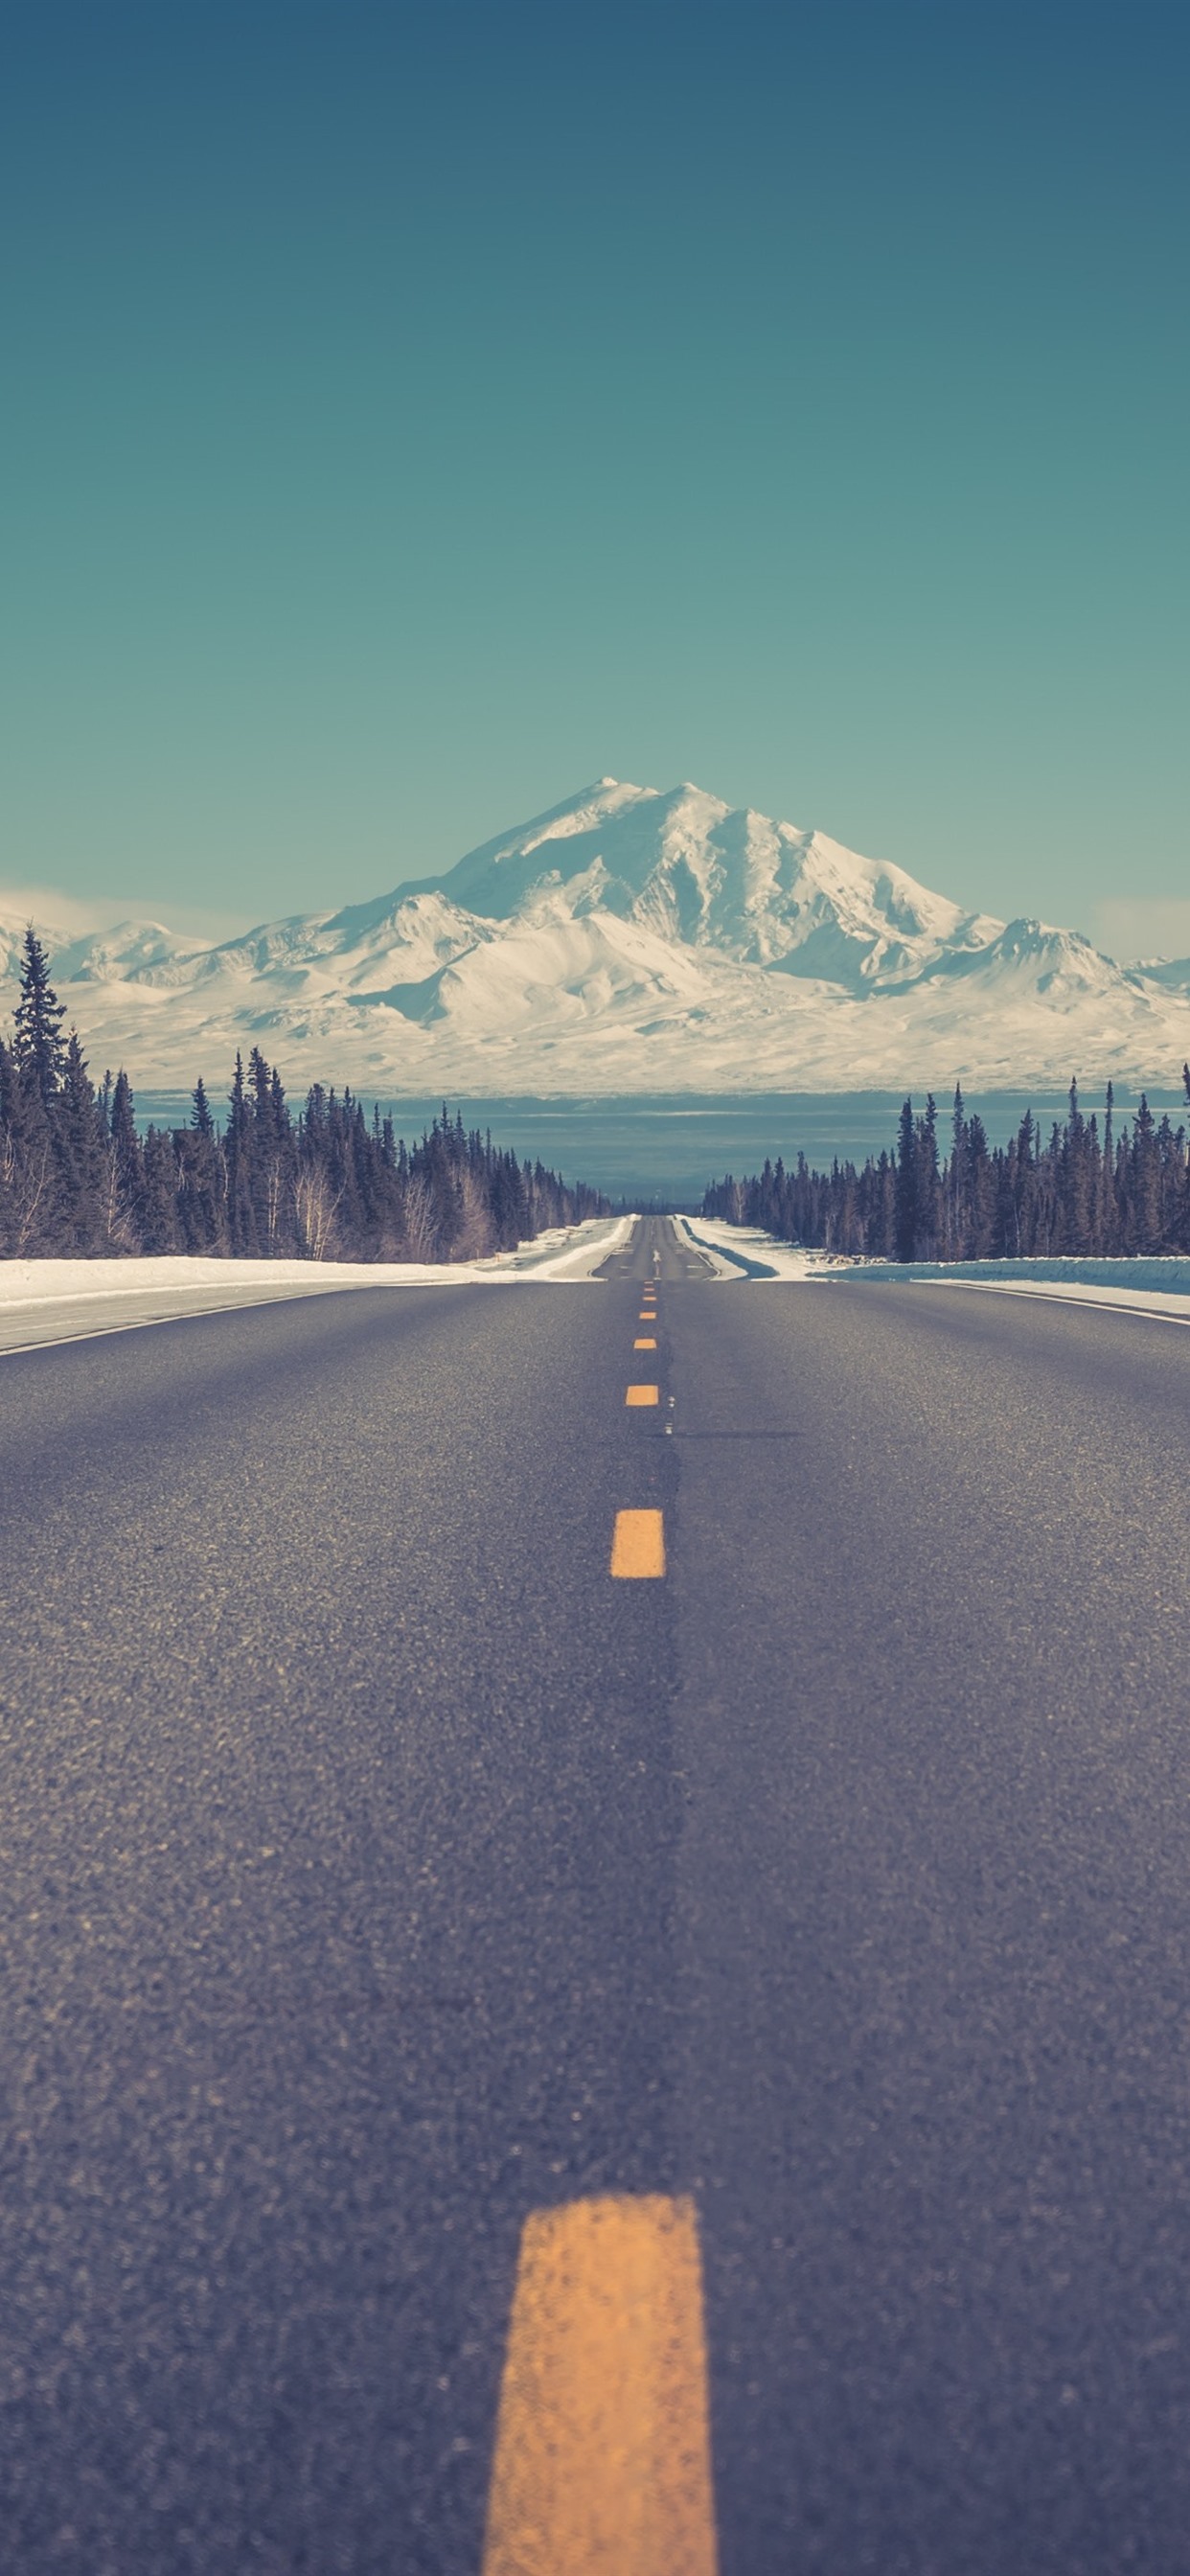 Iphone Wallpaper Mountains, Road, Snow, Winter, Trees - Canada Wallpaper Iphone - HD Wallpaper 